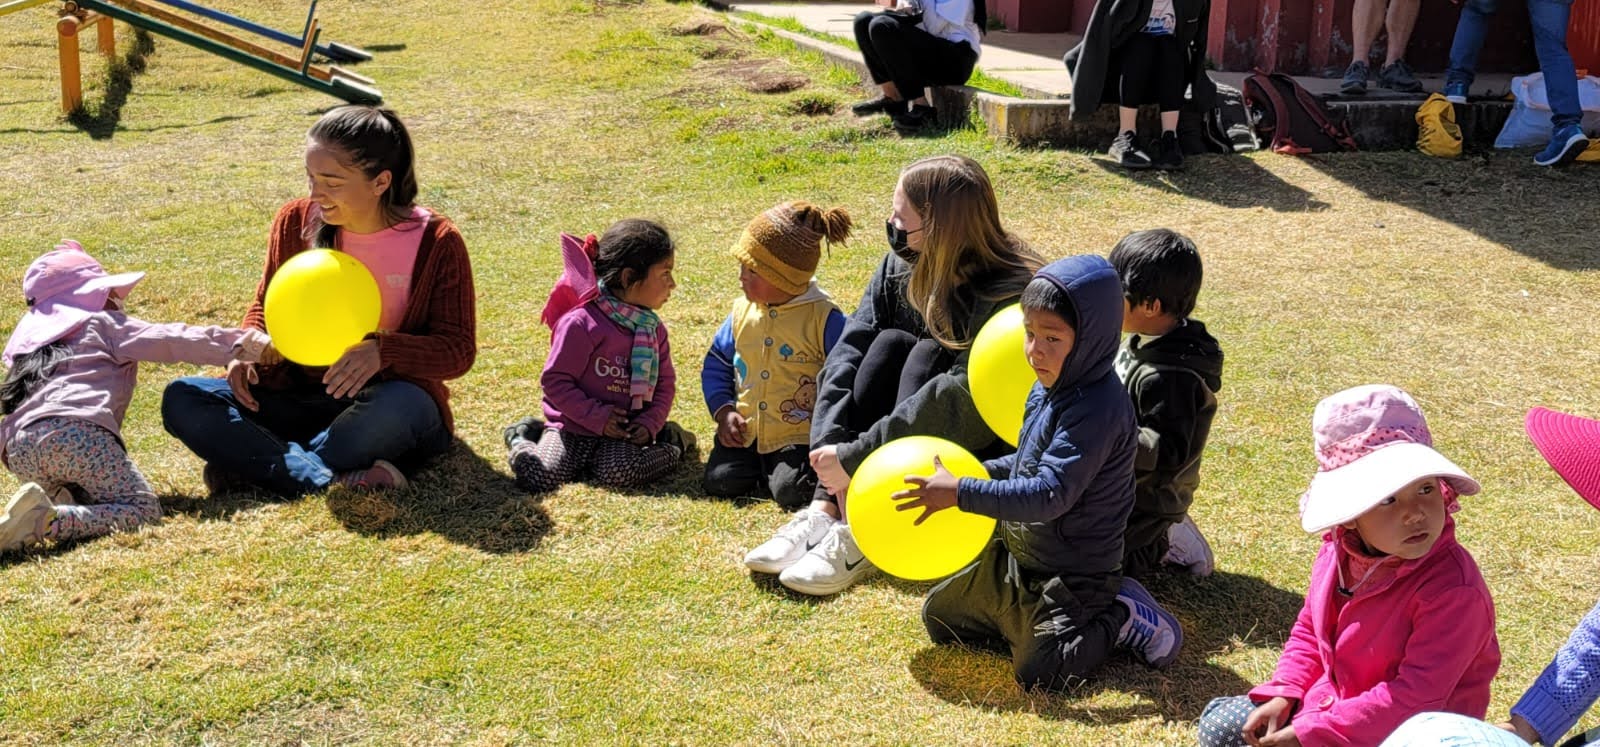 Students sit in a circle on the ground chatting with elementary age children in a community in Peru